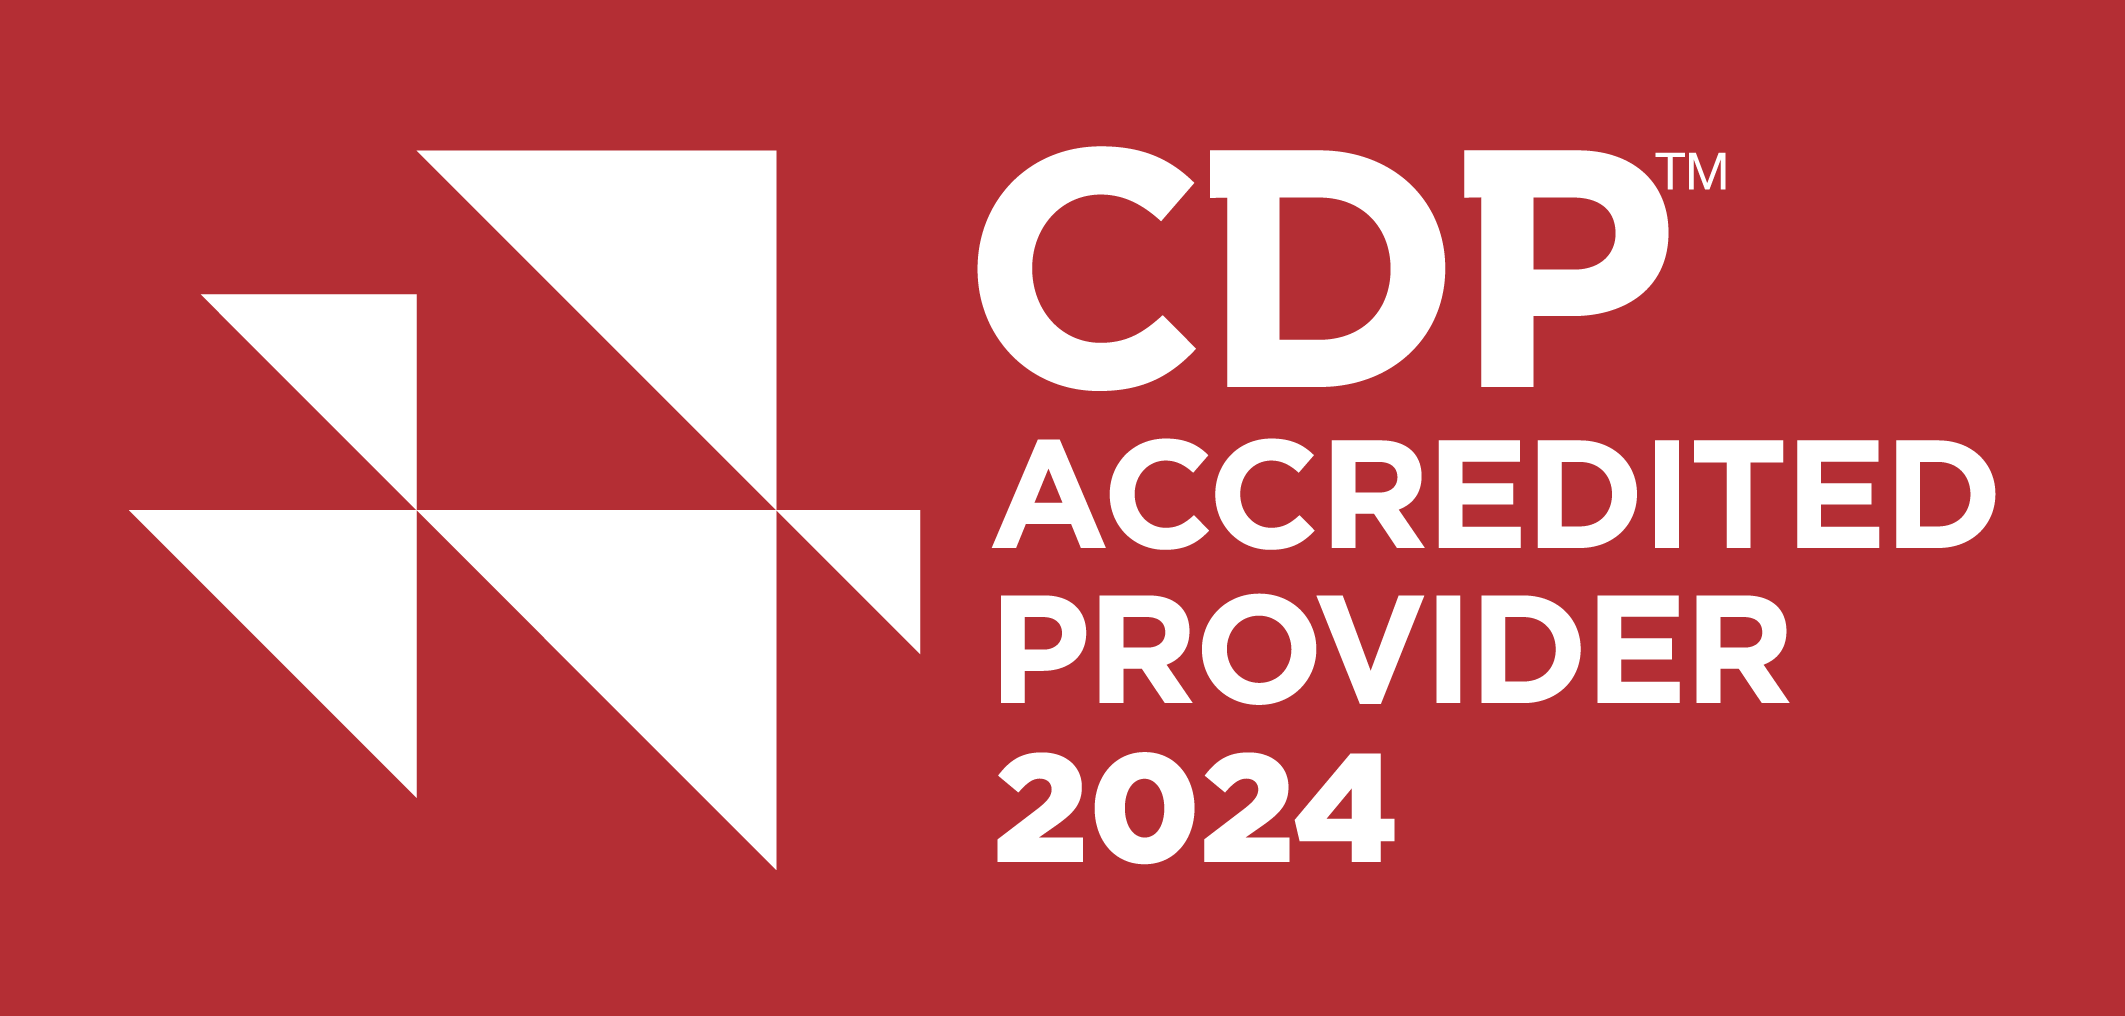 CDP Accredited Provider 2024